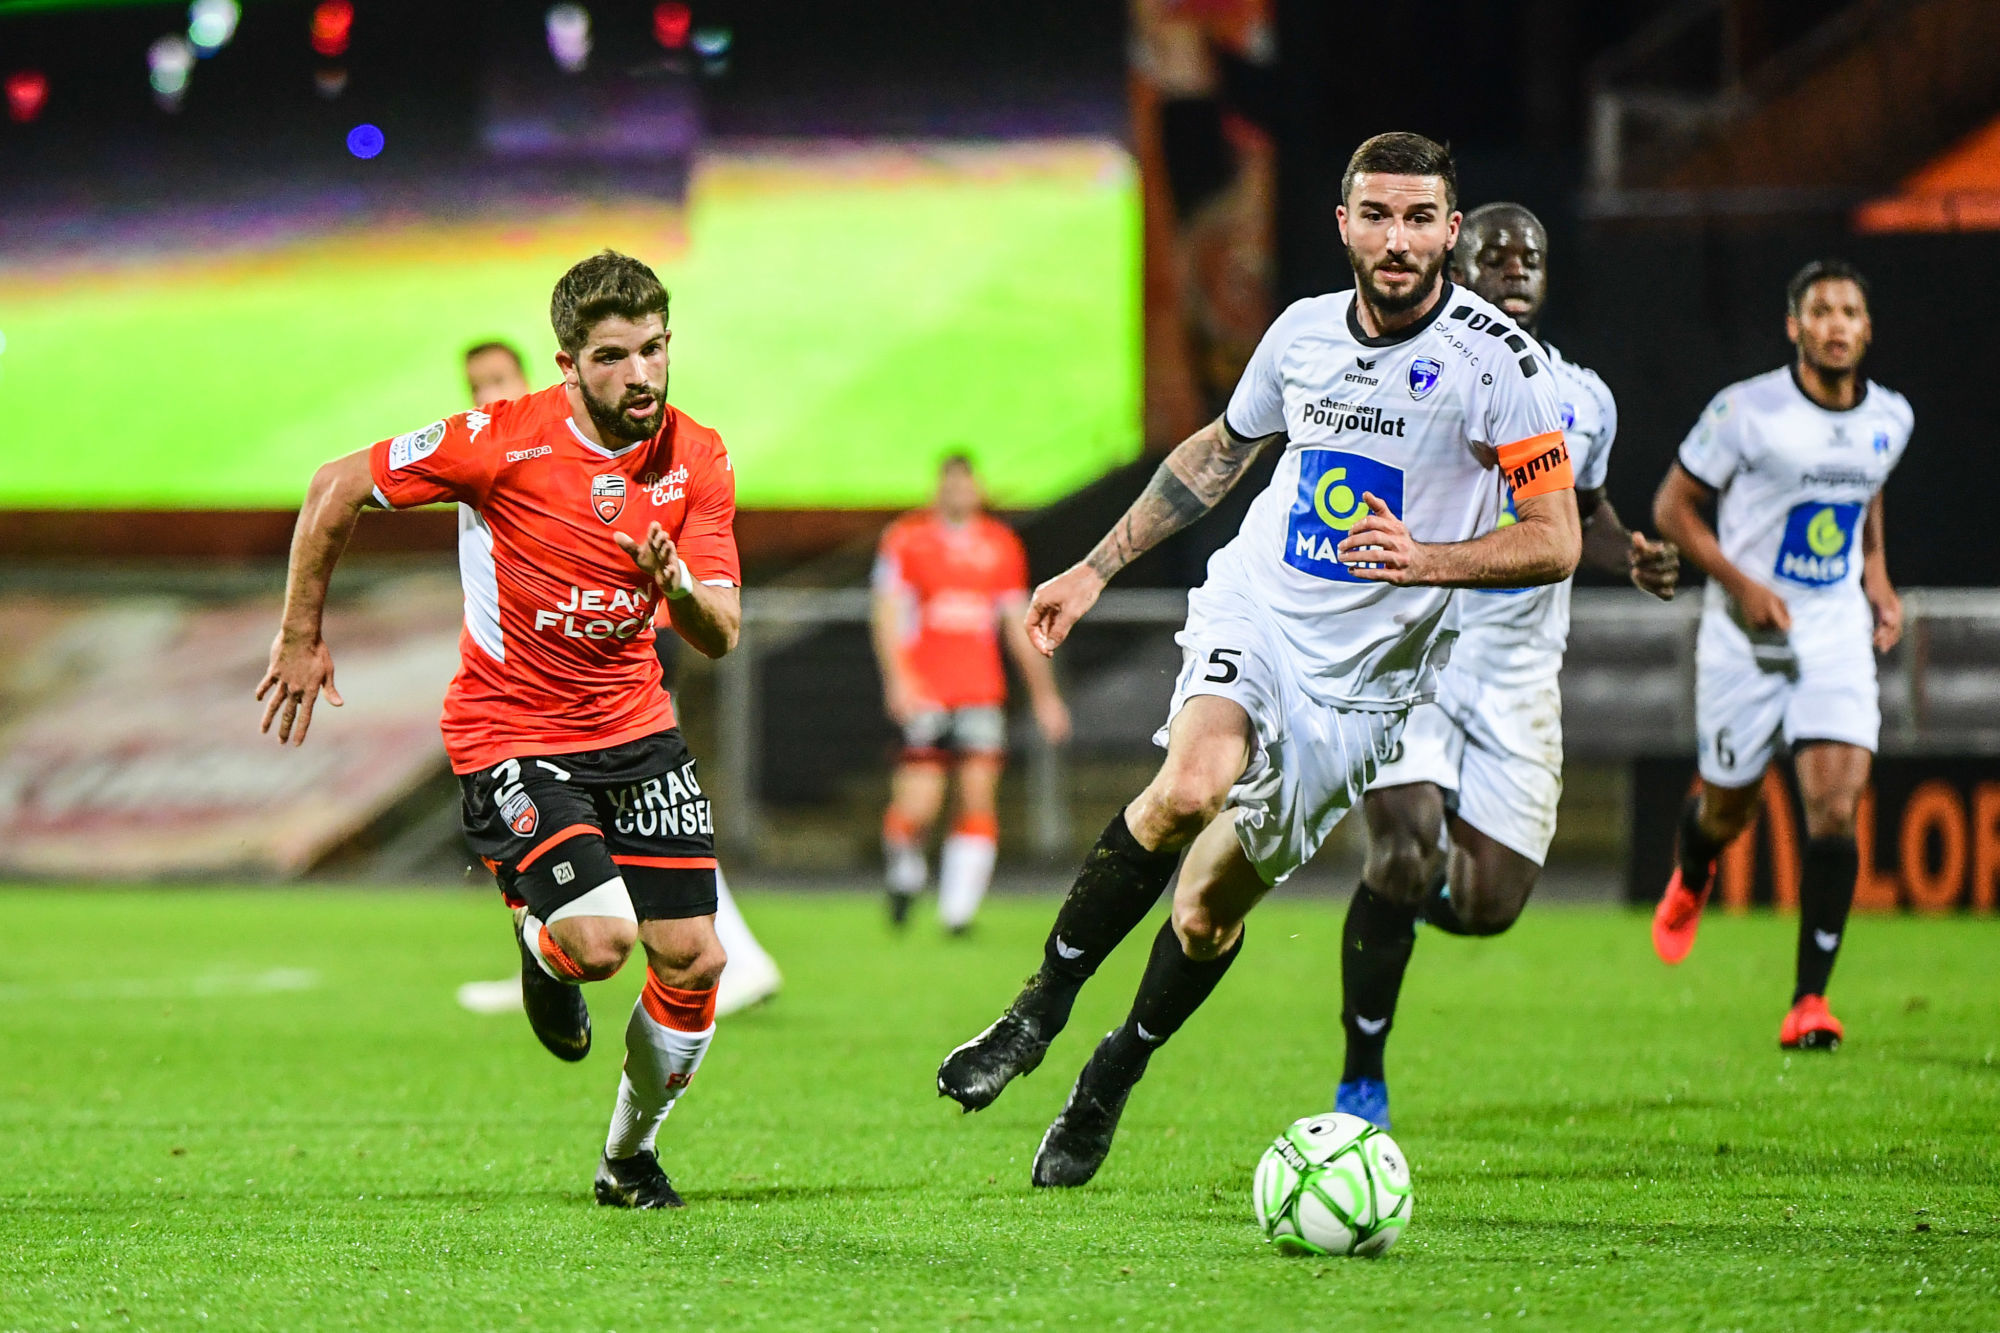 Jimmy CABOT of Lorient and Matthieu SANS of Niort during the Ligue 2 match between Lorient and Niort on November 8, 2019 in Lorient, France. (Photo by Anthony Dibon/Icon Sport) - Capitainerie du Port de Lorient La Base - Lorient (France)